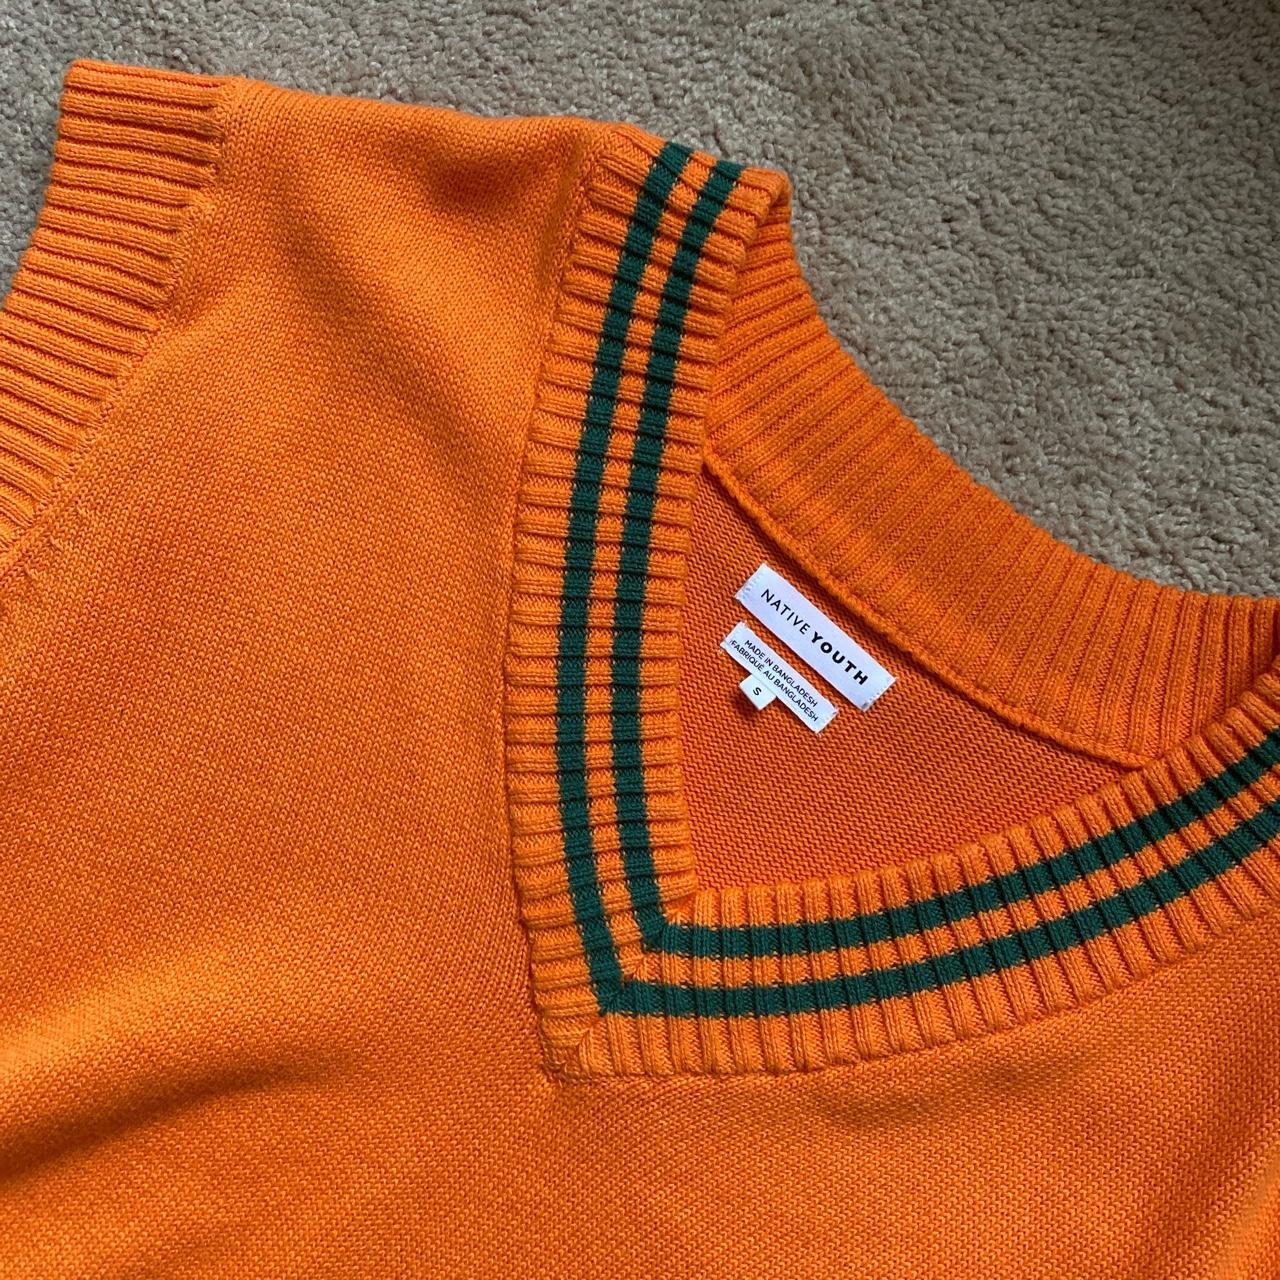 Native Youth Women's Green and Orange Jumper (2)